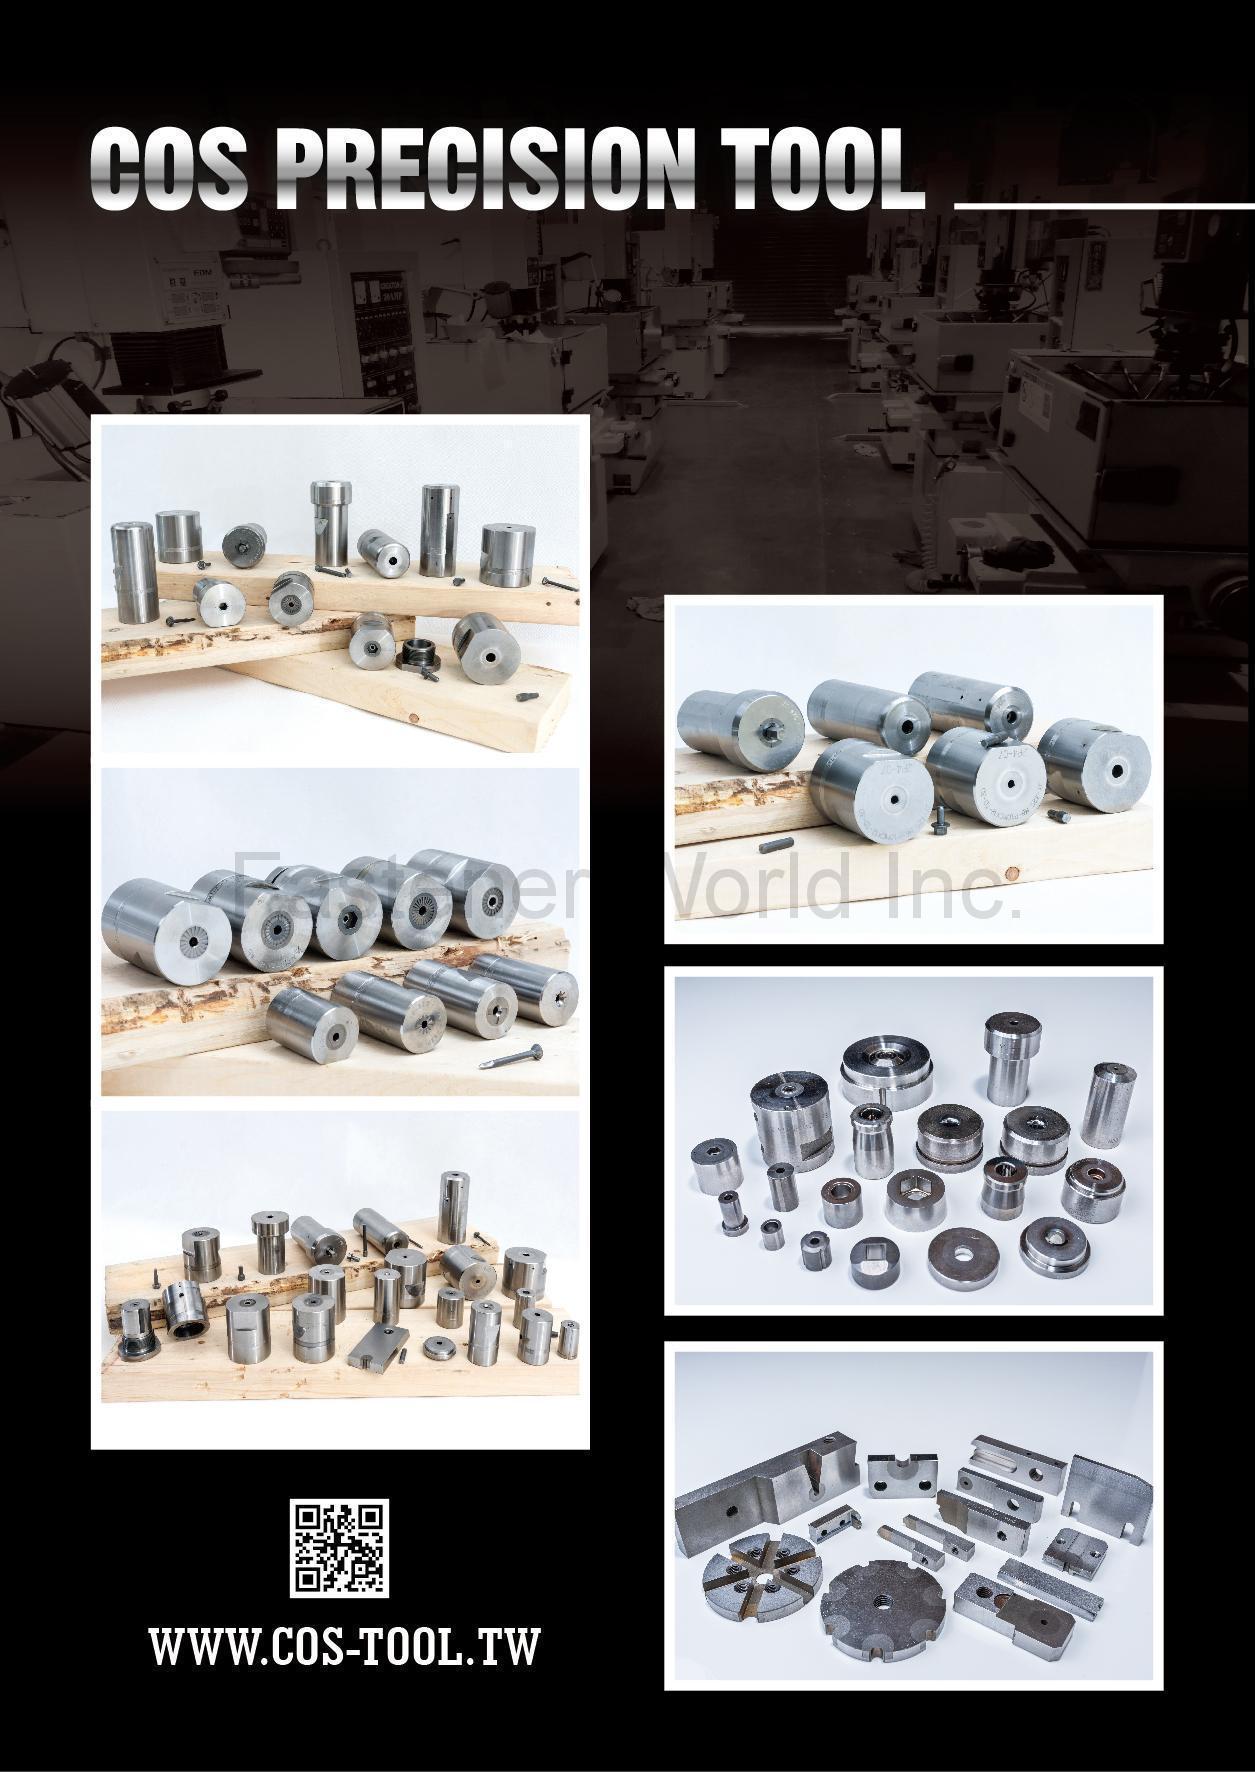 COS PRECISION TOOL CO., LTD. , Customerized Punches, Carbide Punches, CNC Turning Parts, Carbide Dies, Header Punches, Dies and Punches, Cuttging Dies, Serration Dies, Die Set... , Carbide Dies